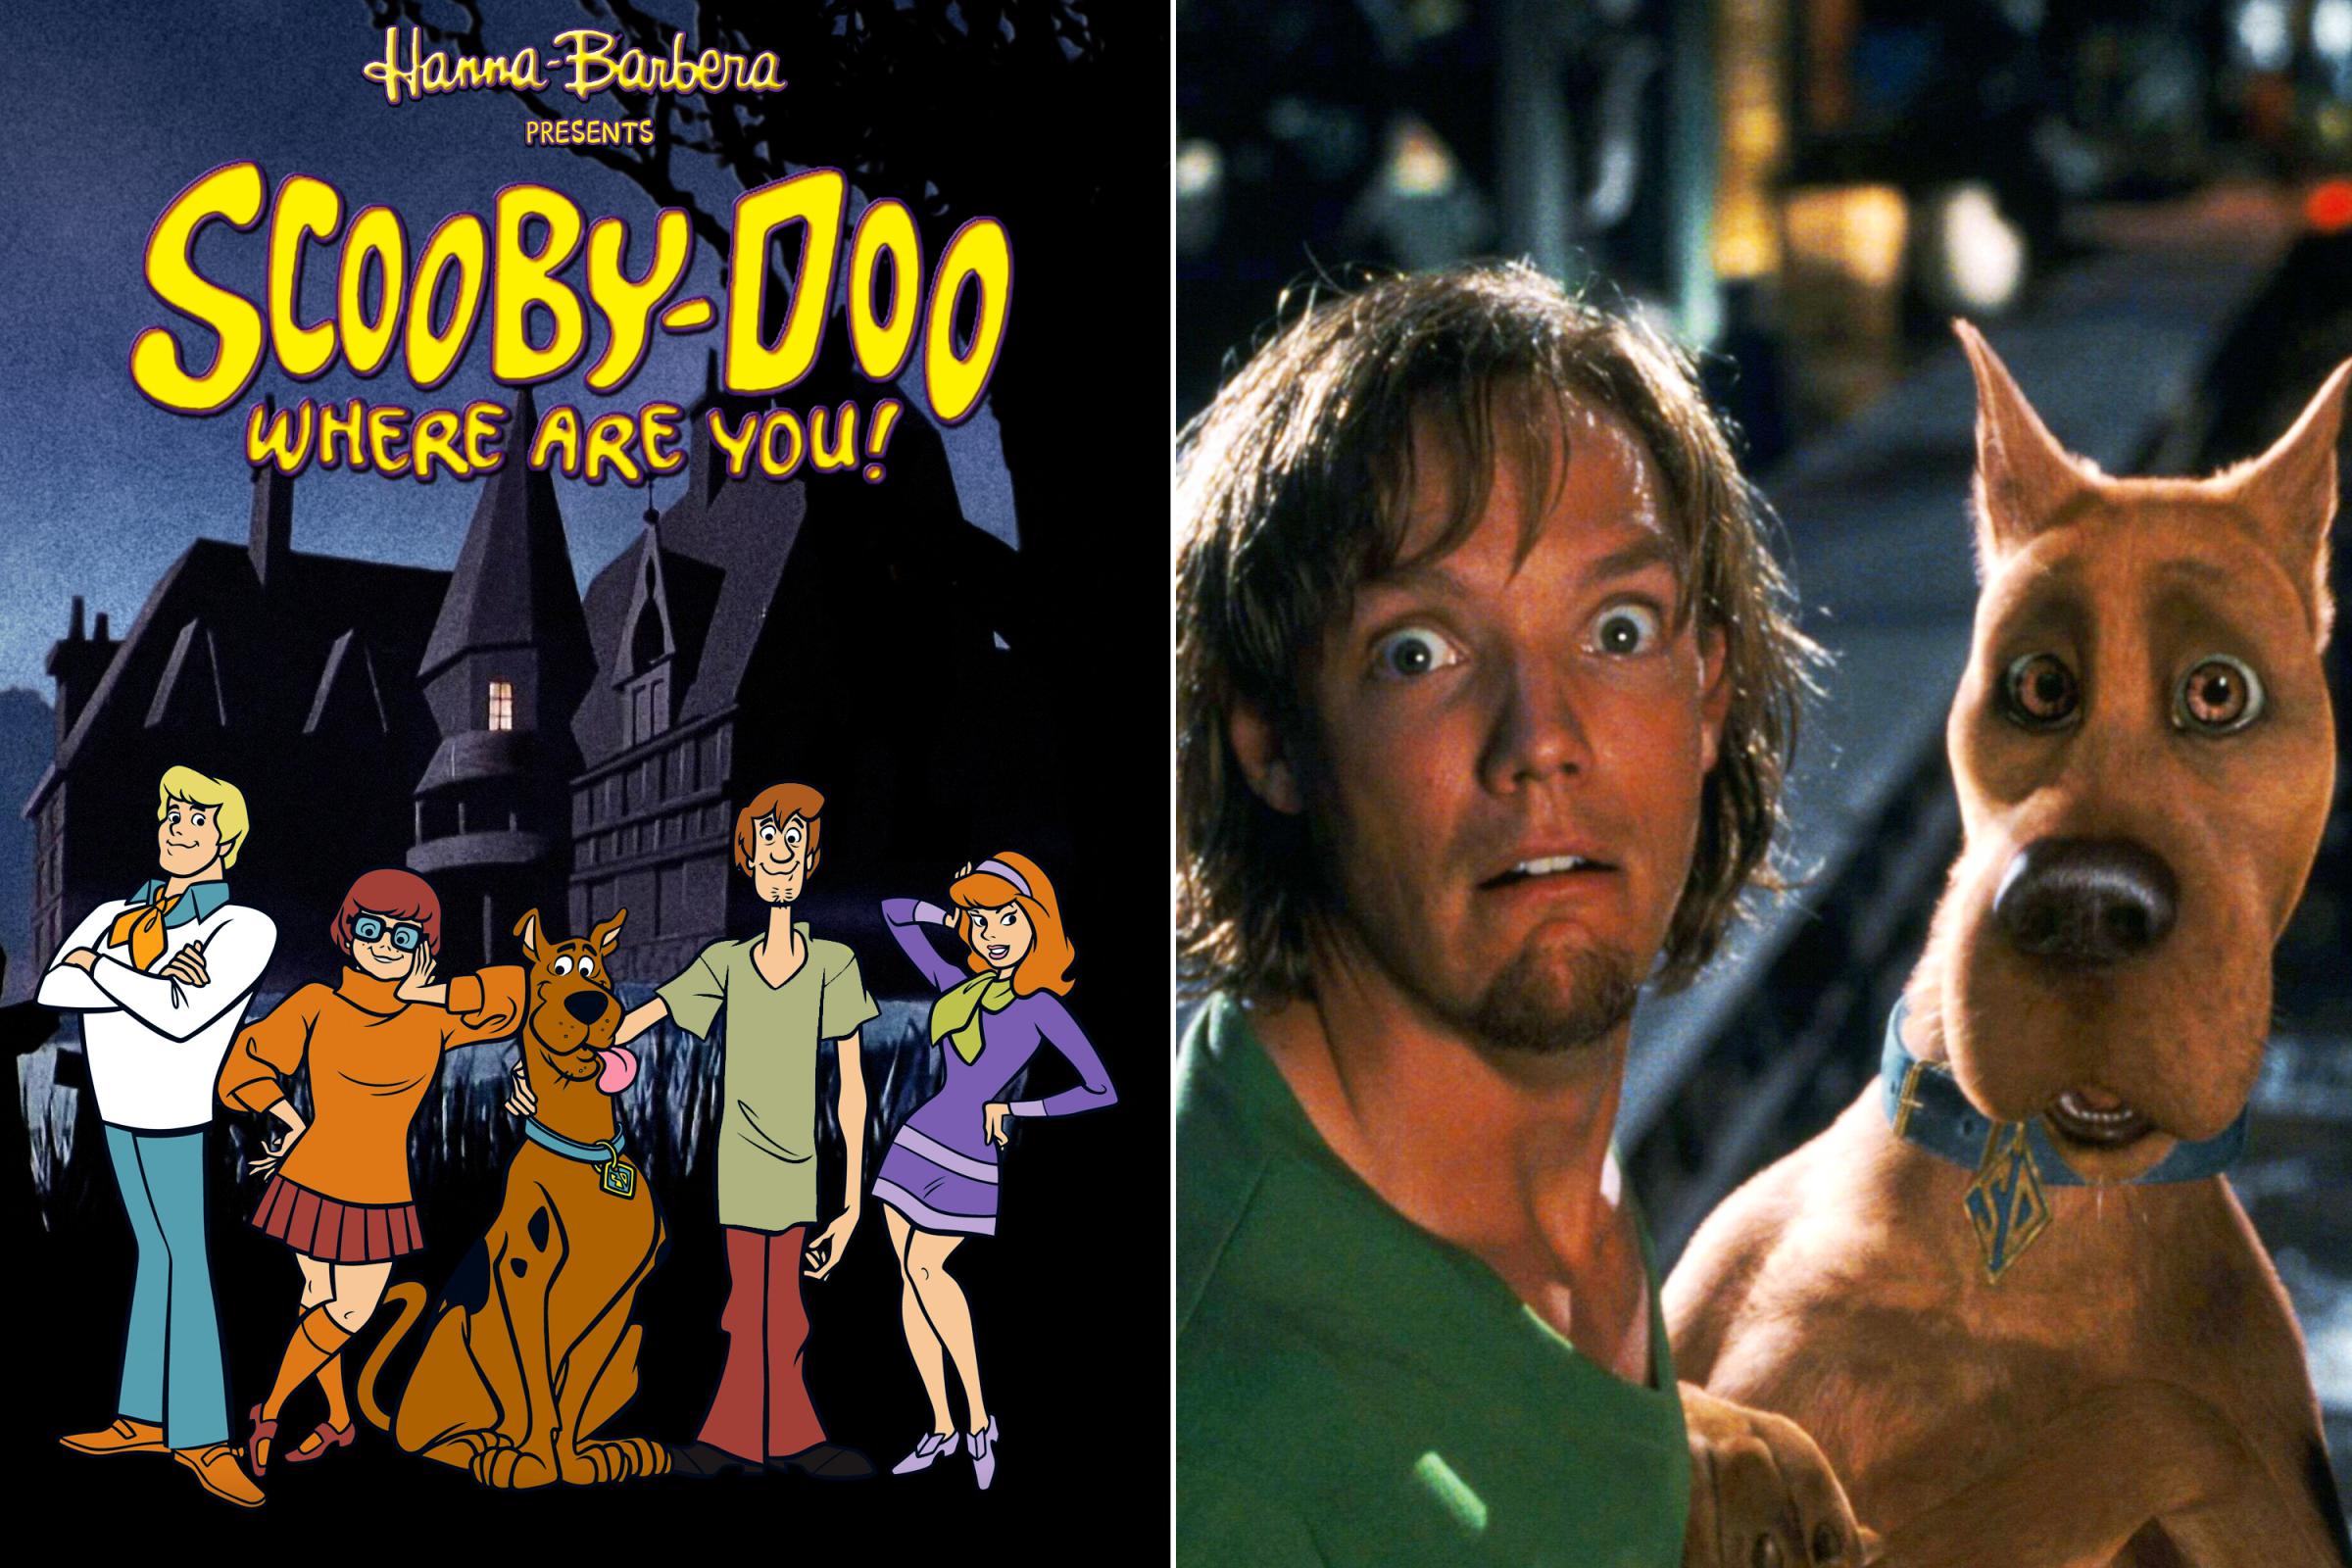 Scooby-Doo, Where Are You!, 1969-1970 and Scooby-Doo, 2002.